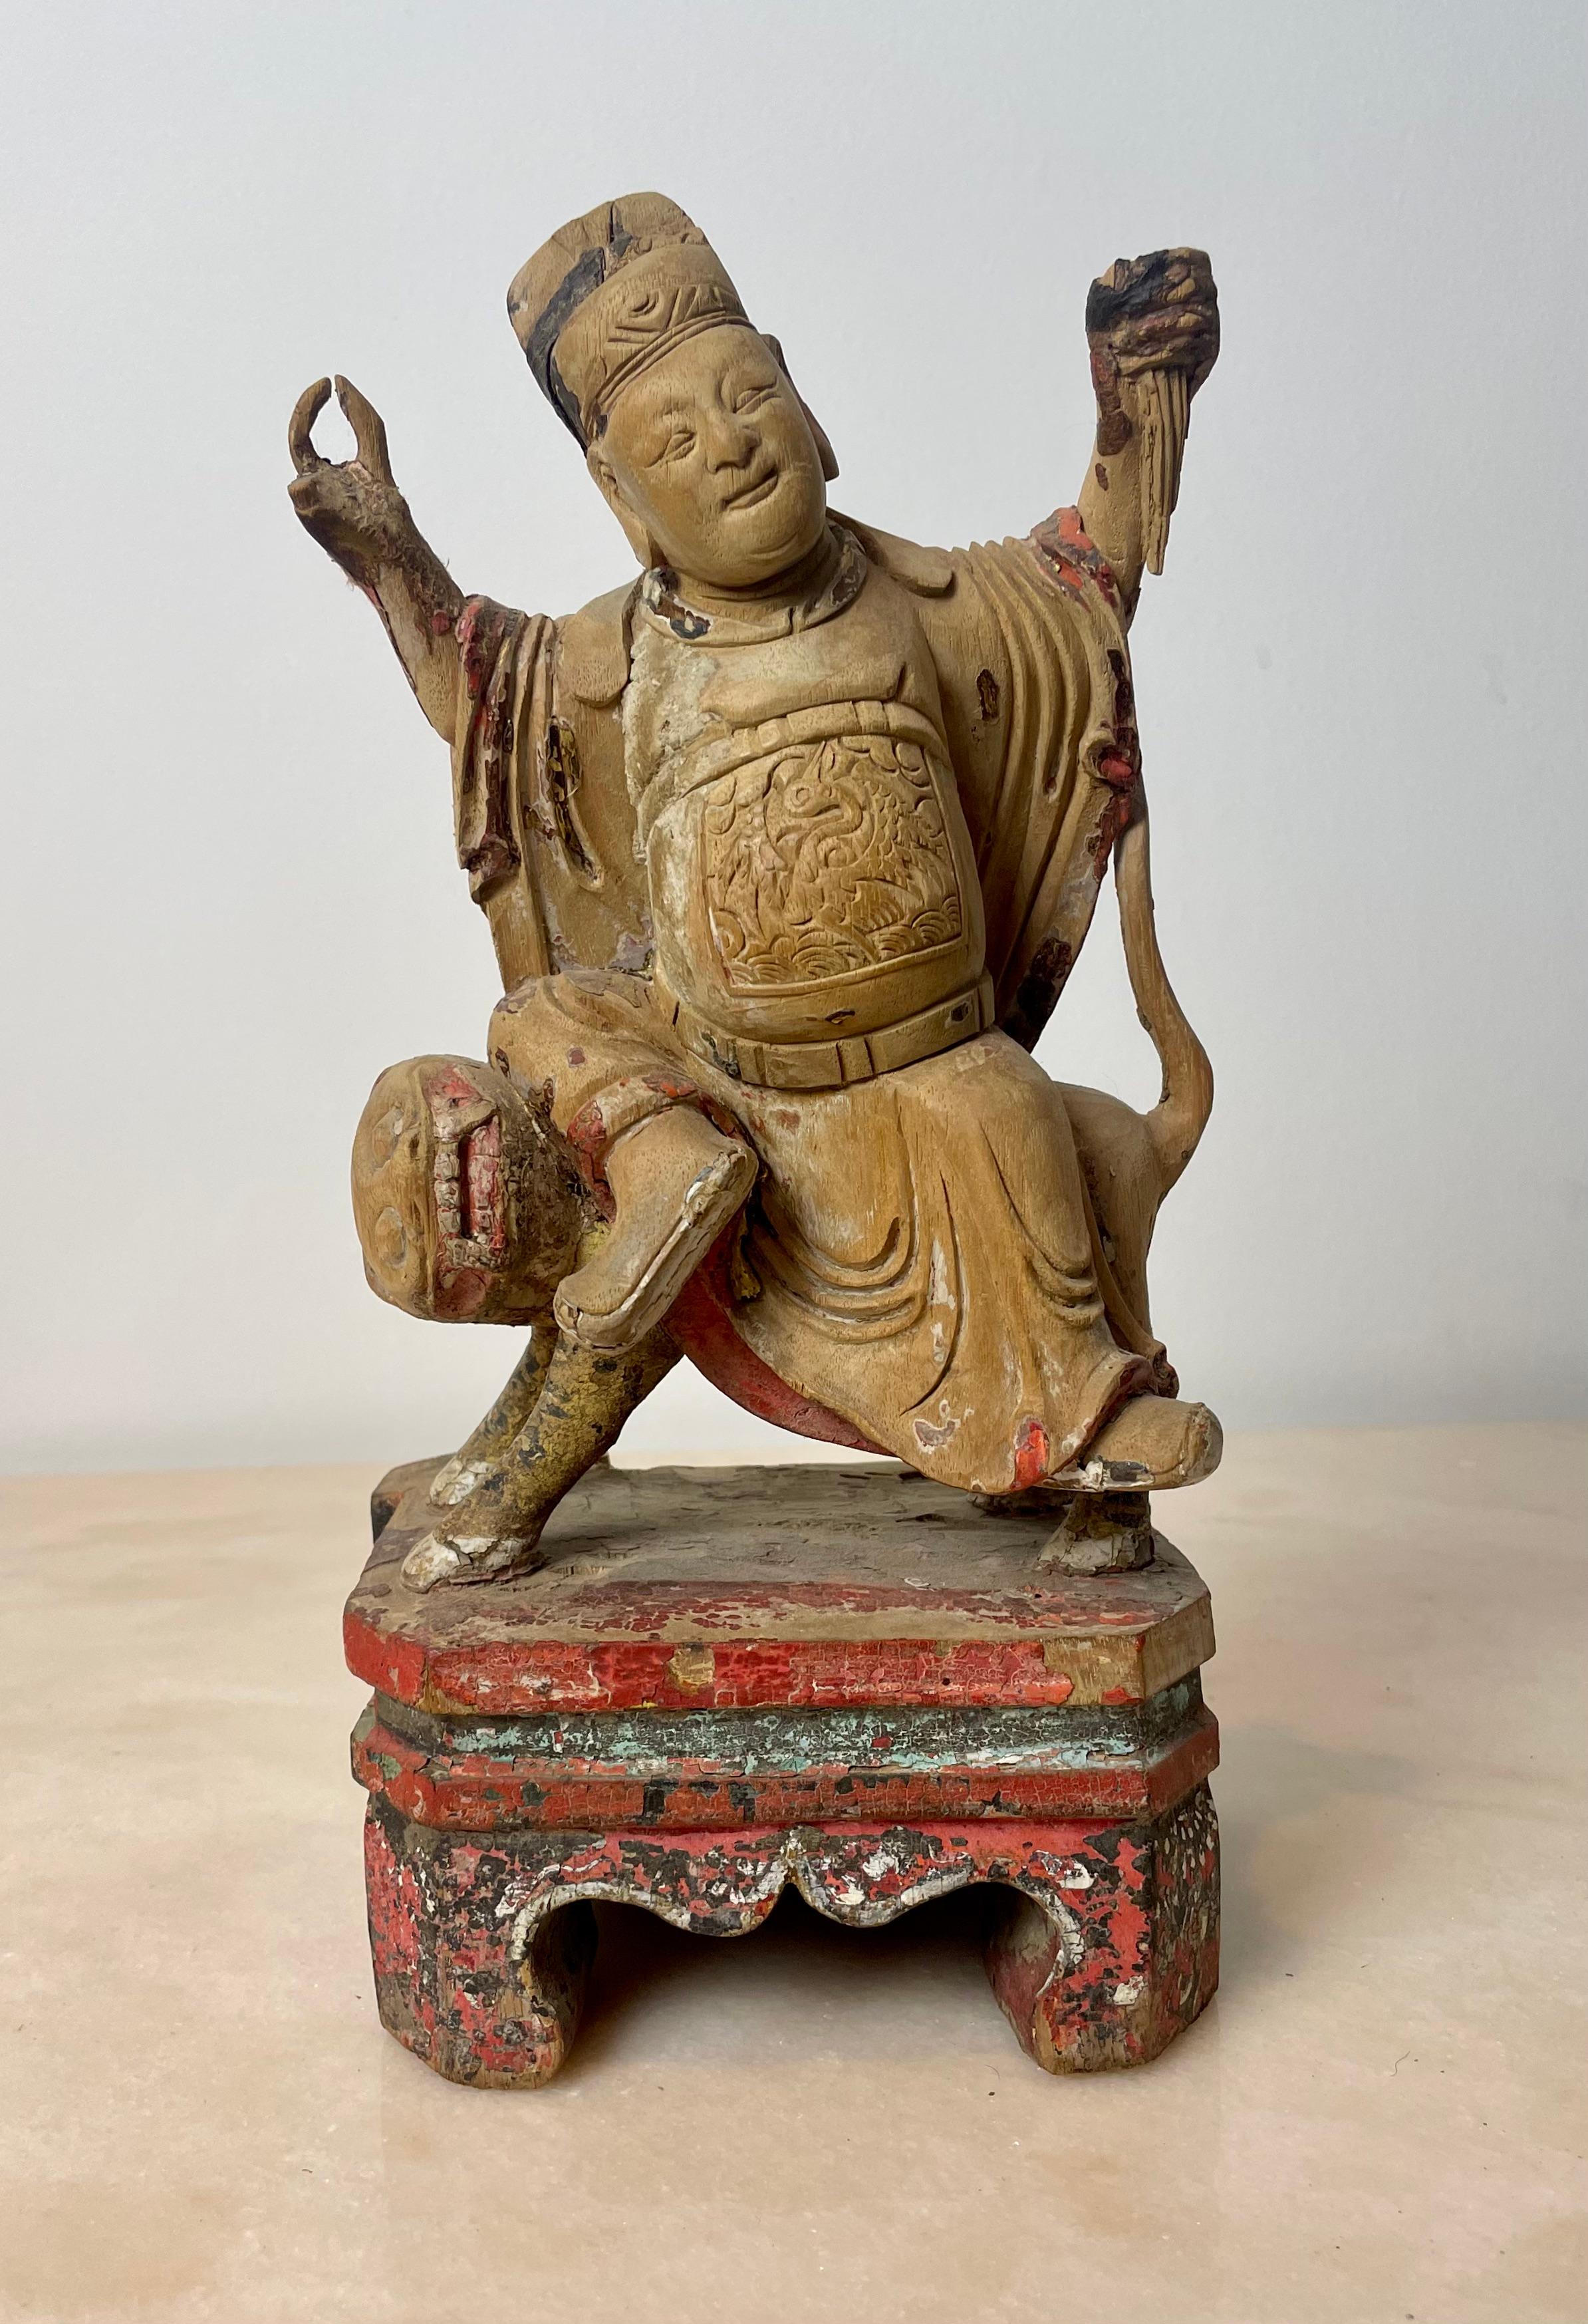 This marvelous polychrome carved wooden statuette represents a Buddhist temple guardian, Guandi or Guan Yu sitting on a Fo dog.
The guardian and the dog are on a base whose feet recall the shape of the temples.
The temple guardian has a peaceful and